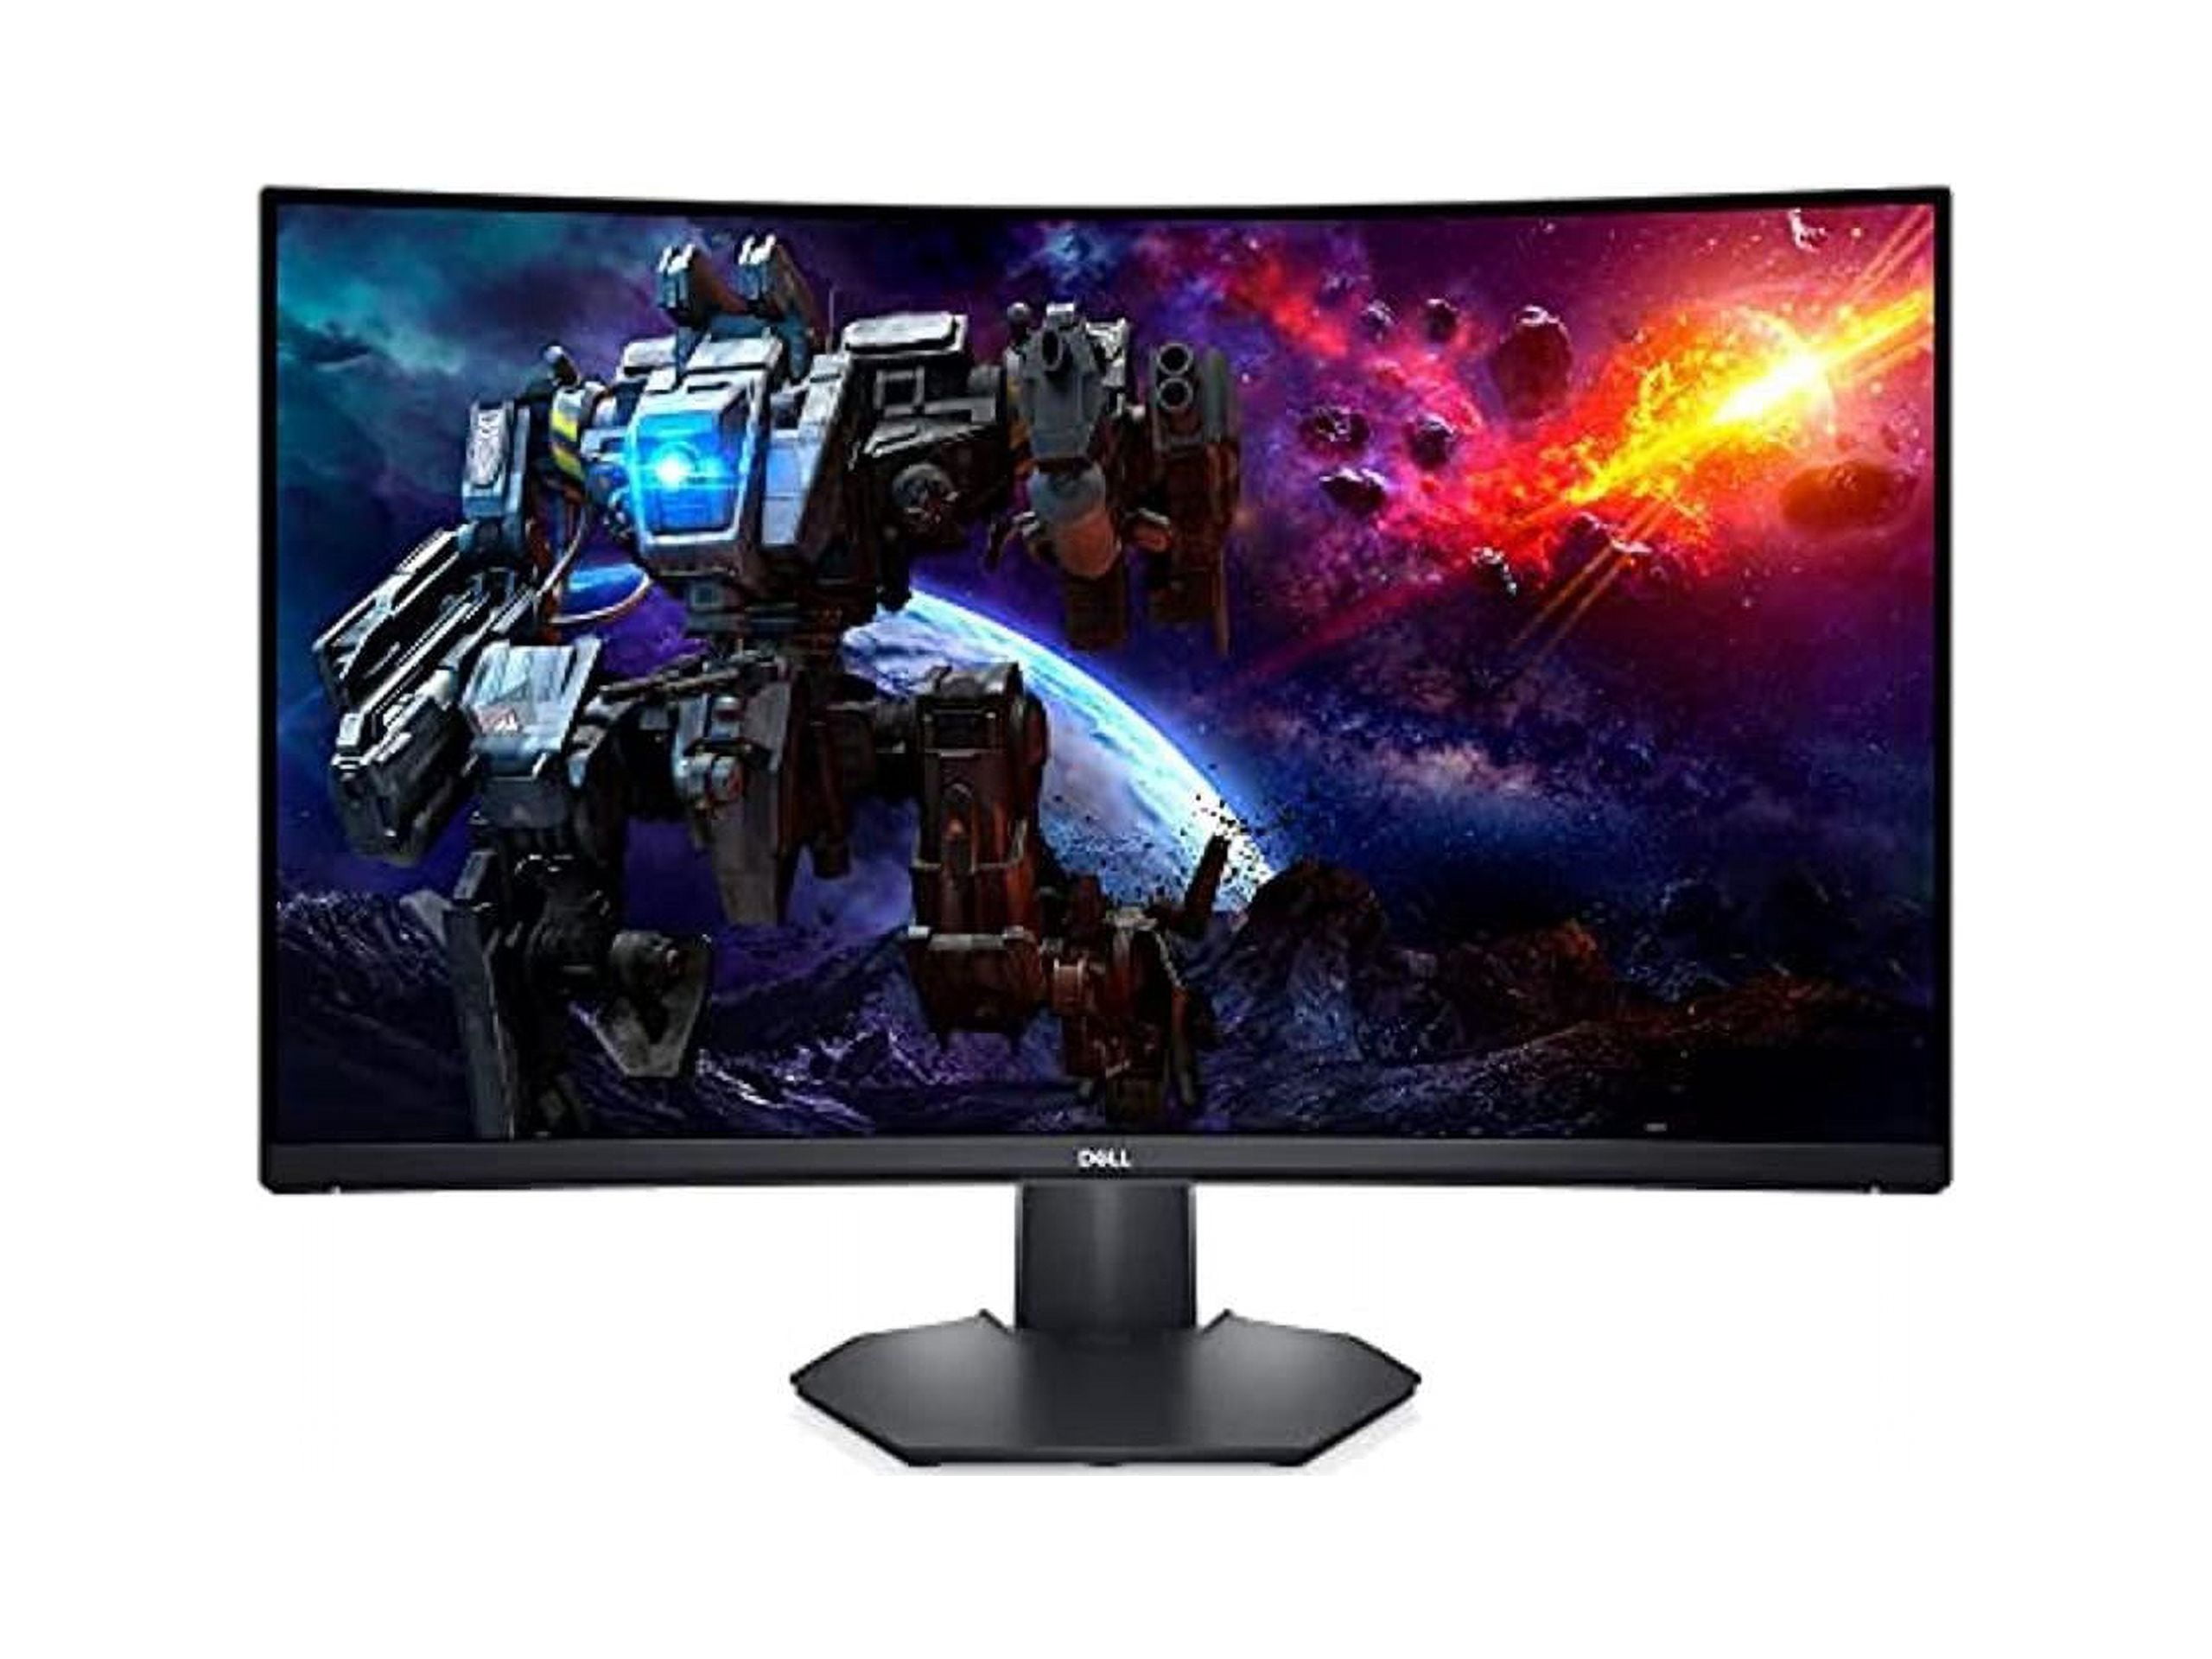 Dell S3222HN 32-inch FHD 1920 x 1080 at 75Hz Curved Monitor, 1800R  Curvature, 8ms Grey-to-Grey Response Time (Normal Mode), 16.7 Million  Colors, Black (Latest Model) 